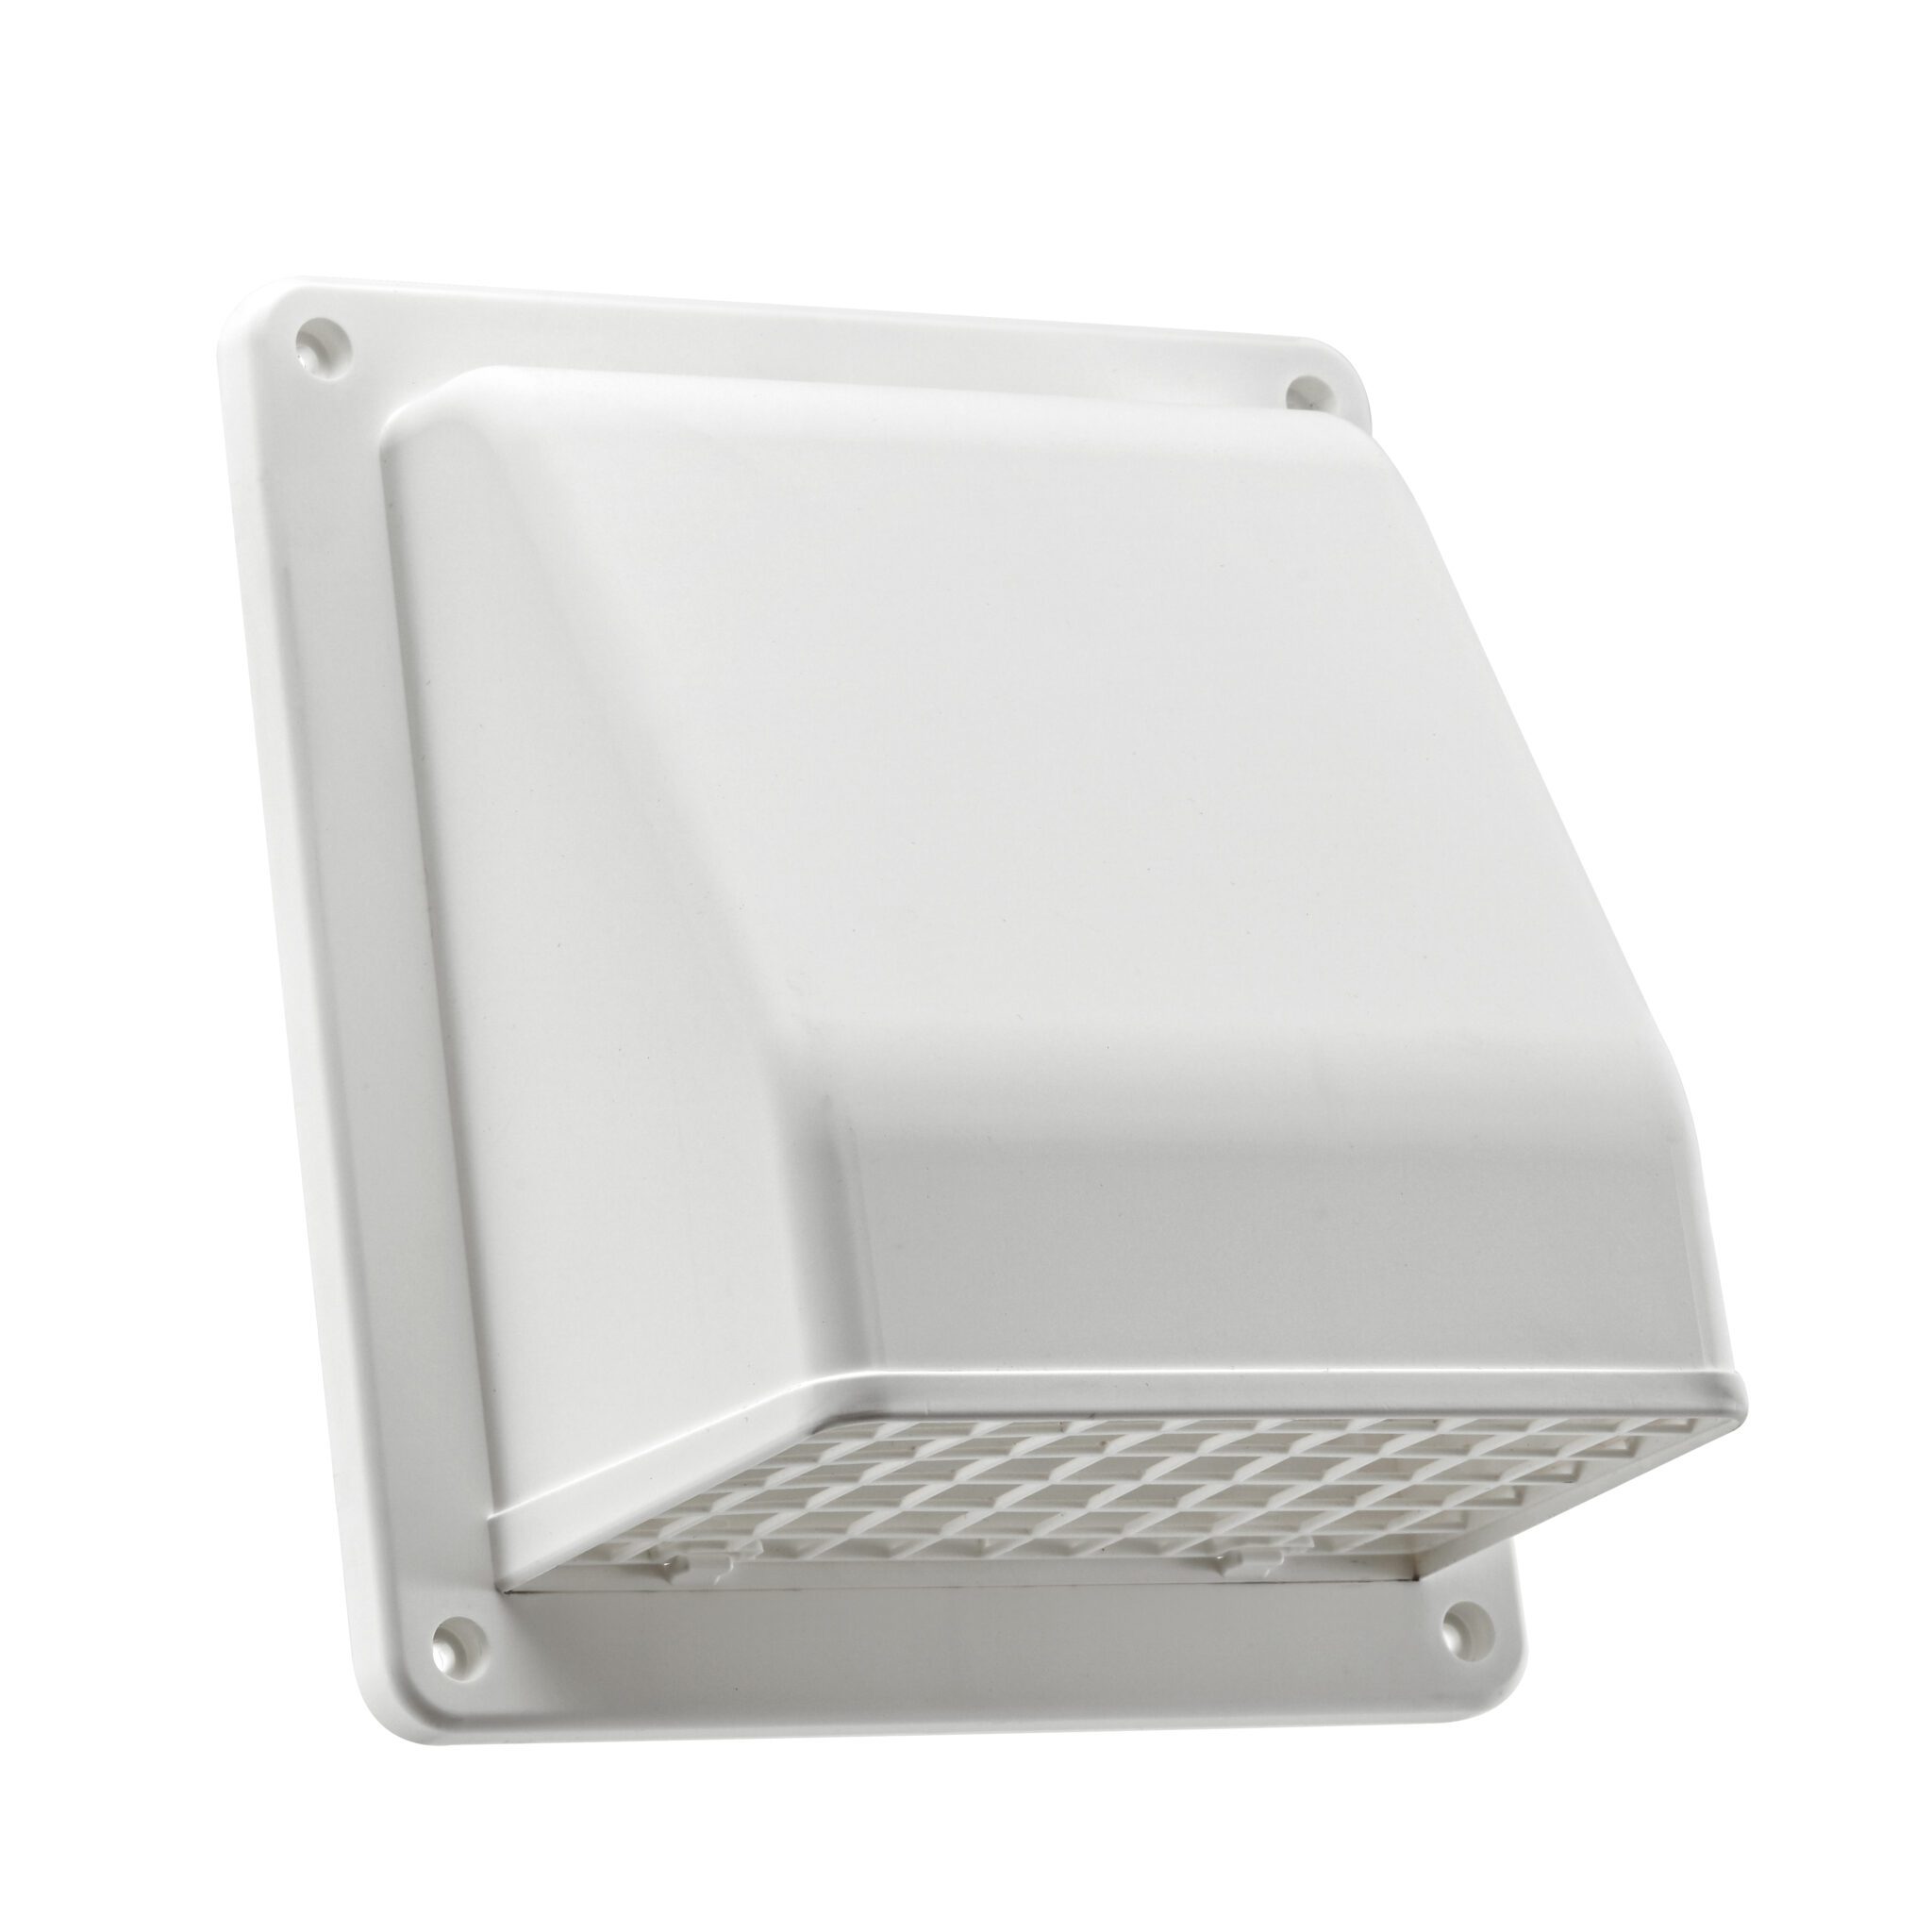 6 inch White Plastic Wall Exhaust or Air Intake Vent - Hinged Screen ...